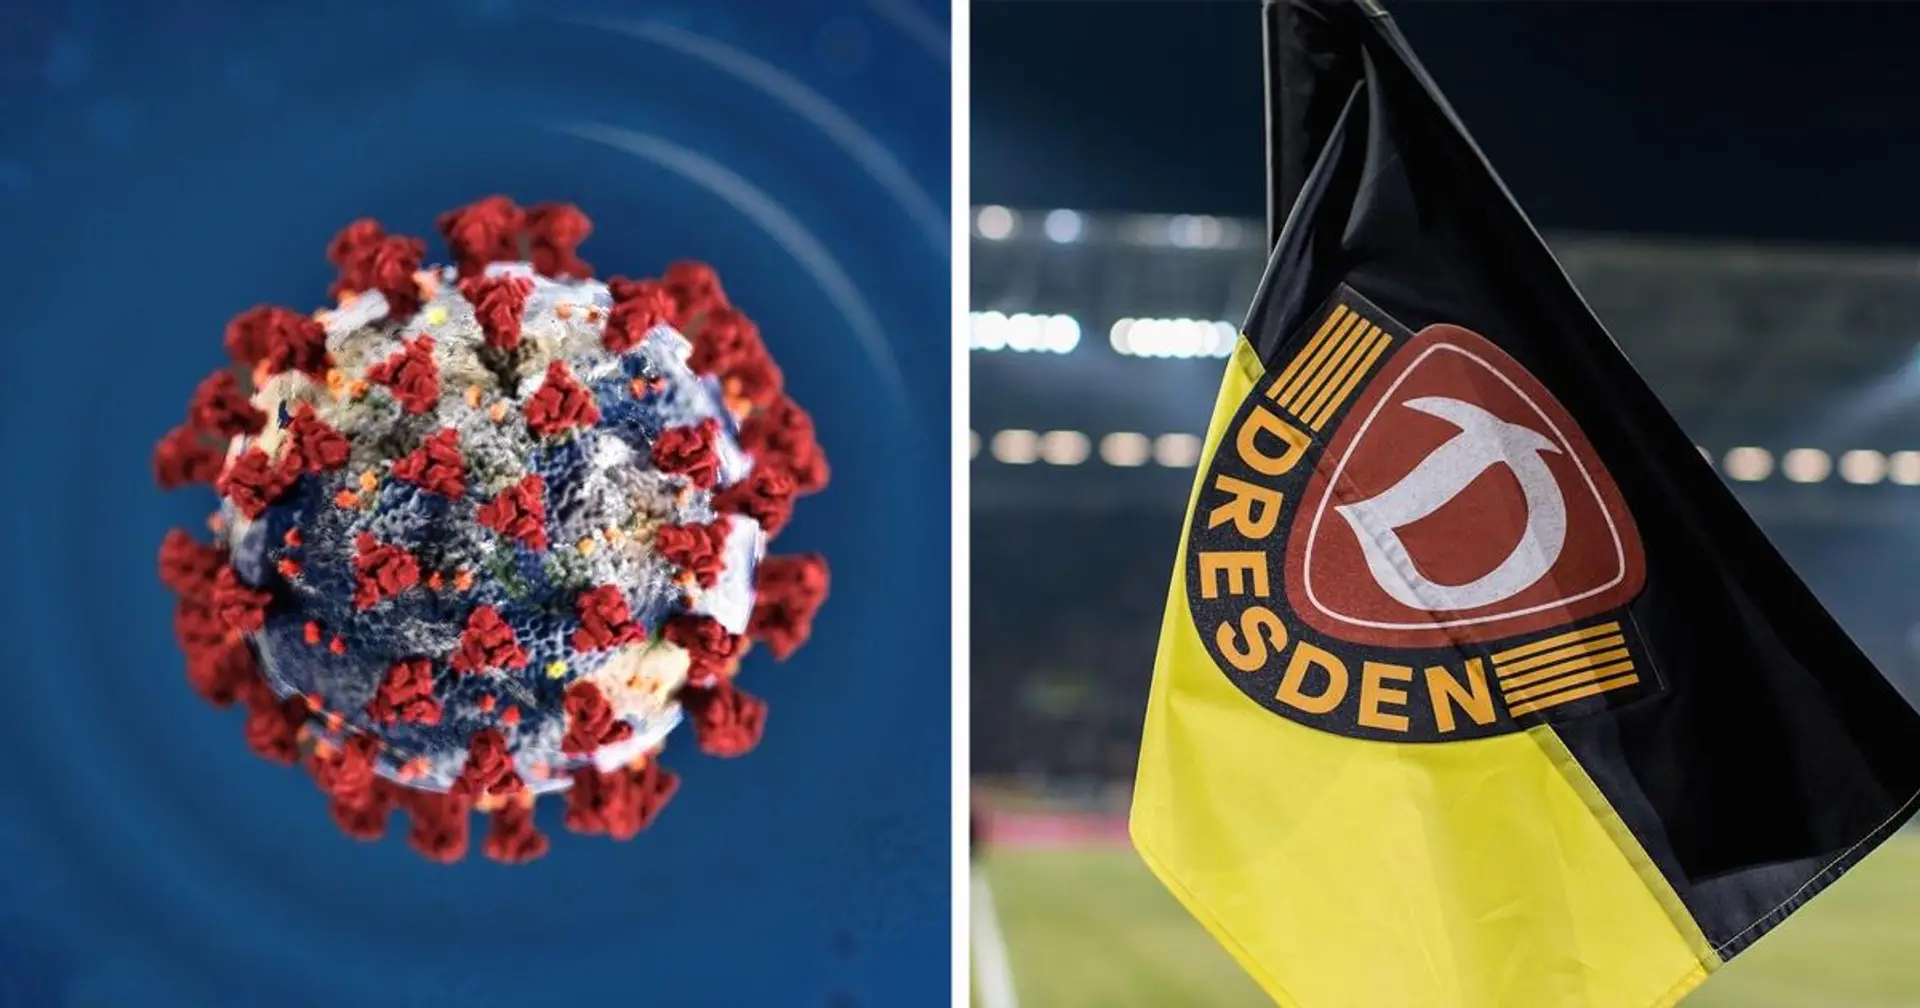 German football may be further postponed after Bundesliga 2 side forced to isolate 2 players positive for coronavirus